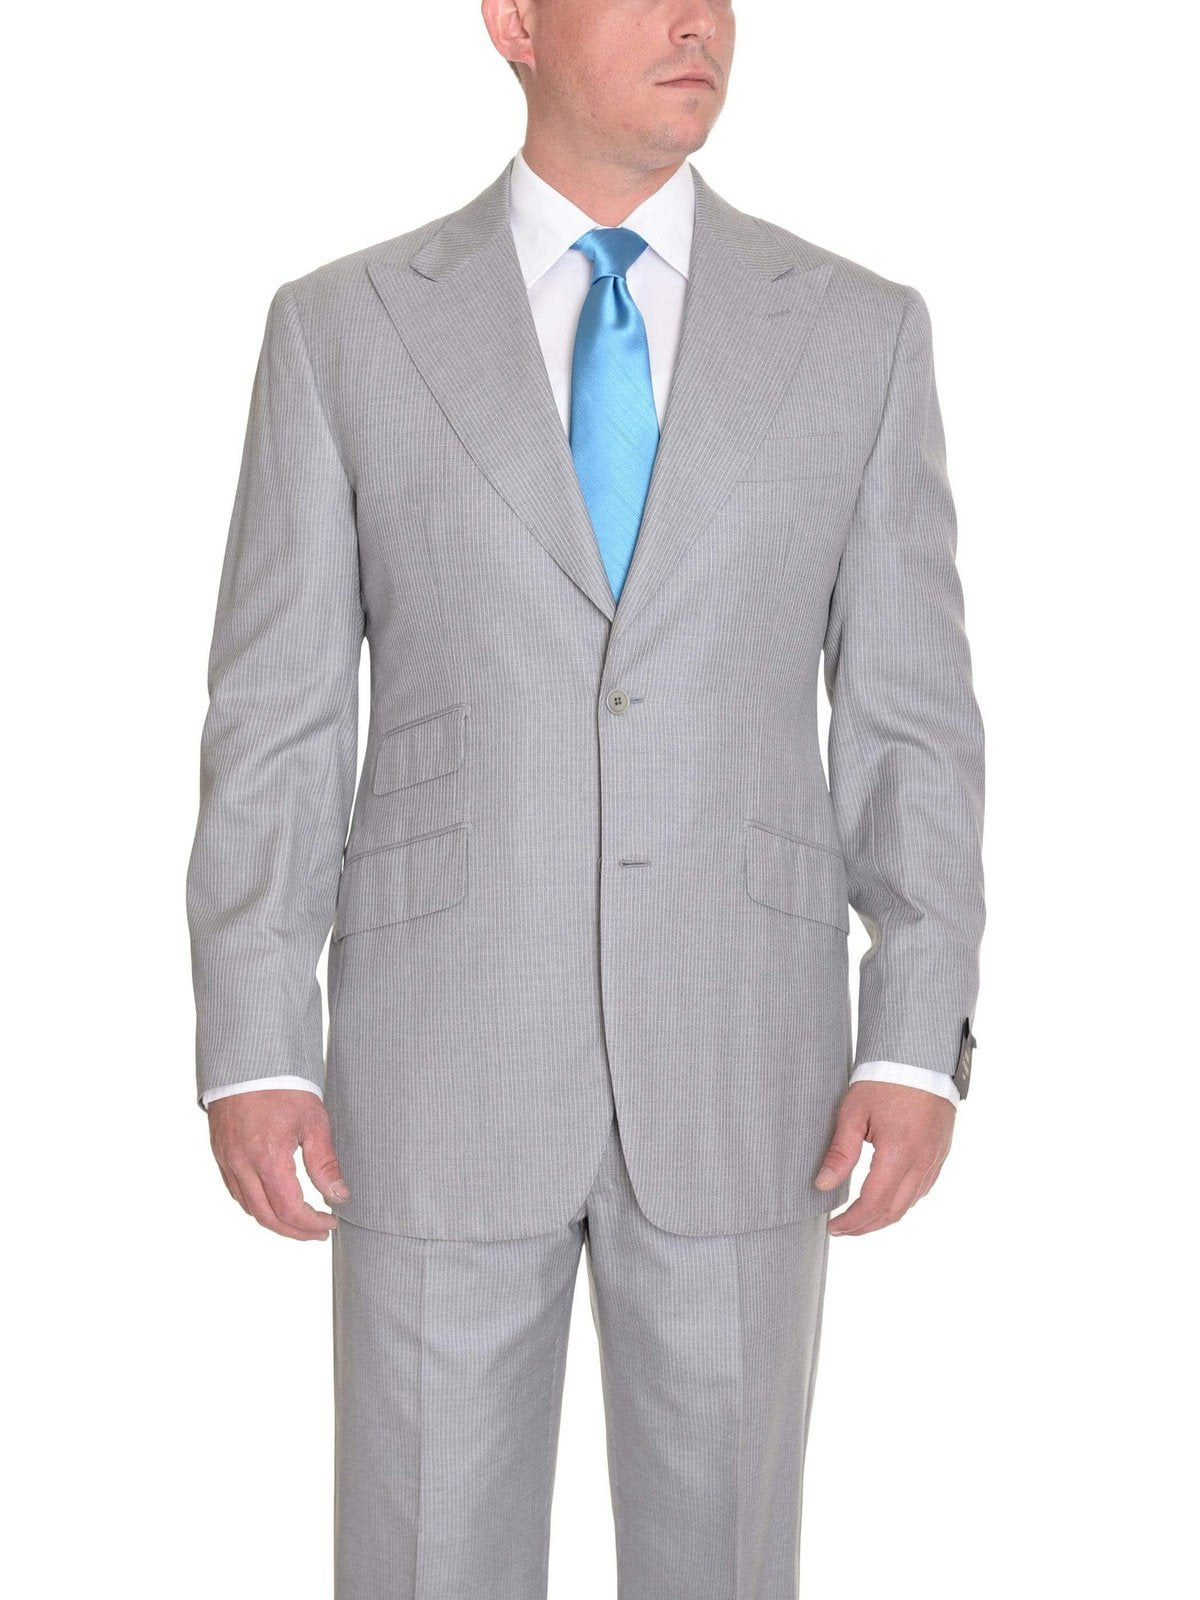 Sartoria Partenopea 40R 50 Light Gray Pinstriped Wool Silk Suit With Peak Lapels - The Suit Depot